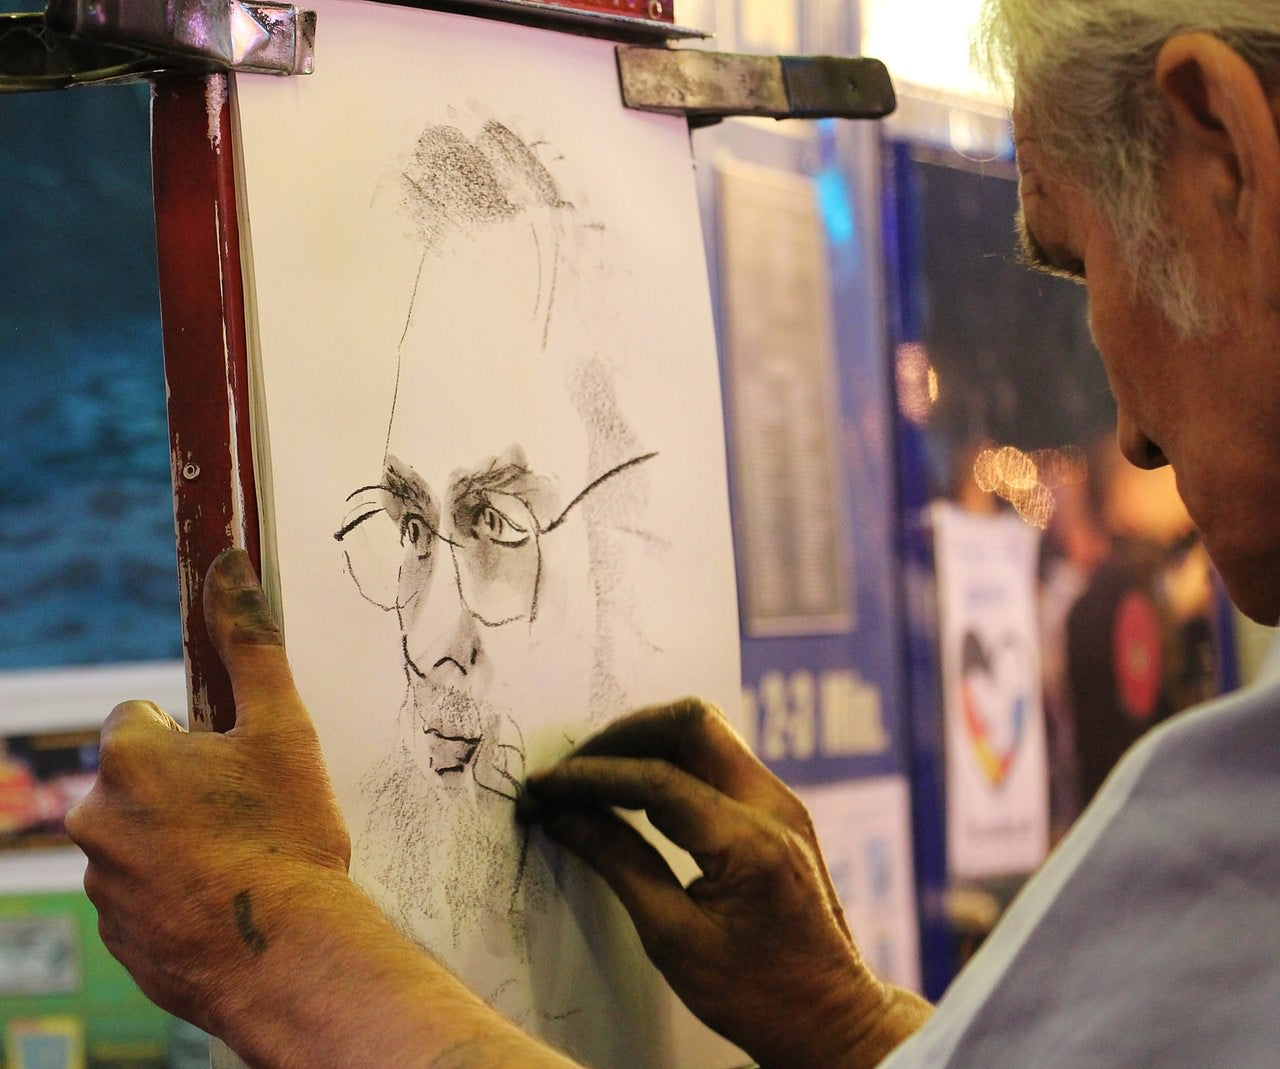 Artist using charcoal to paint a man's face wearing glasses